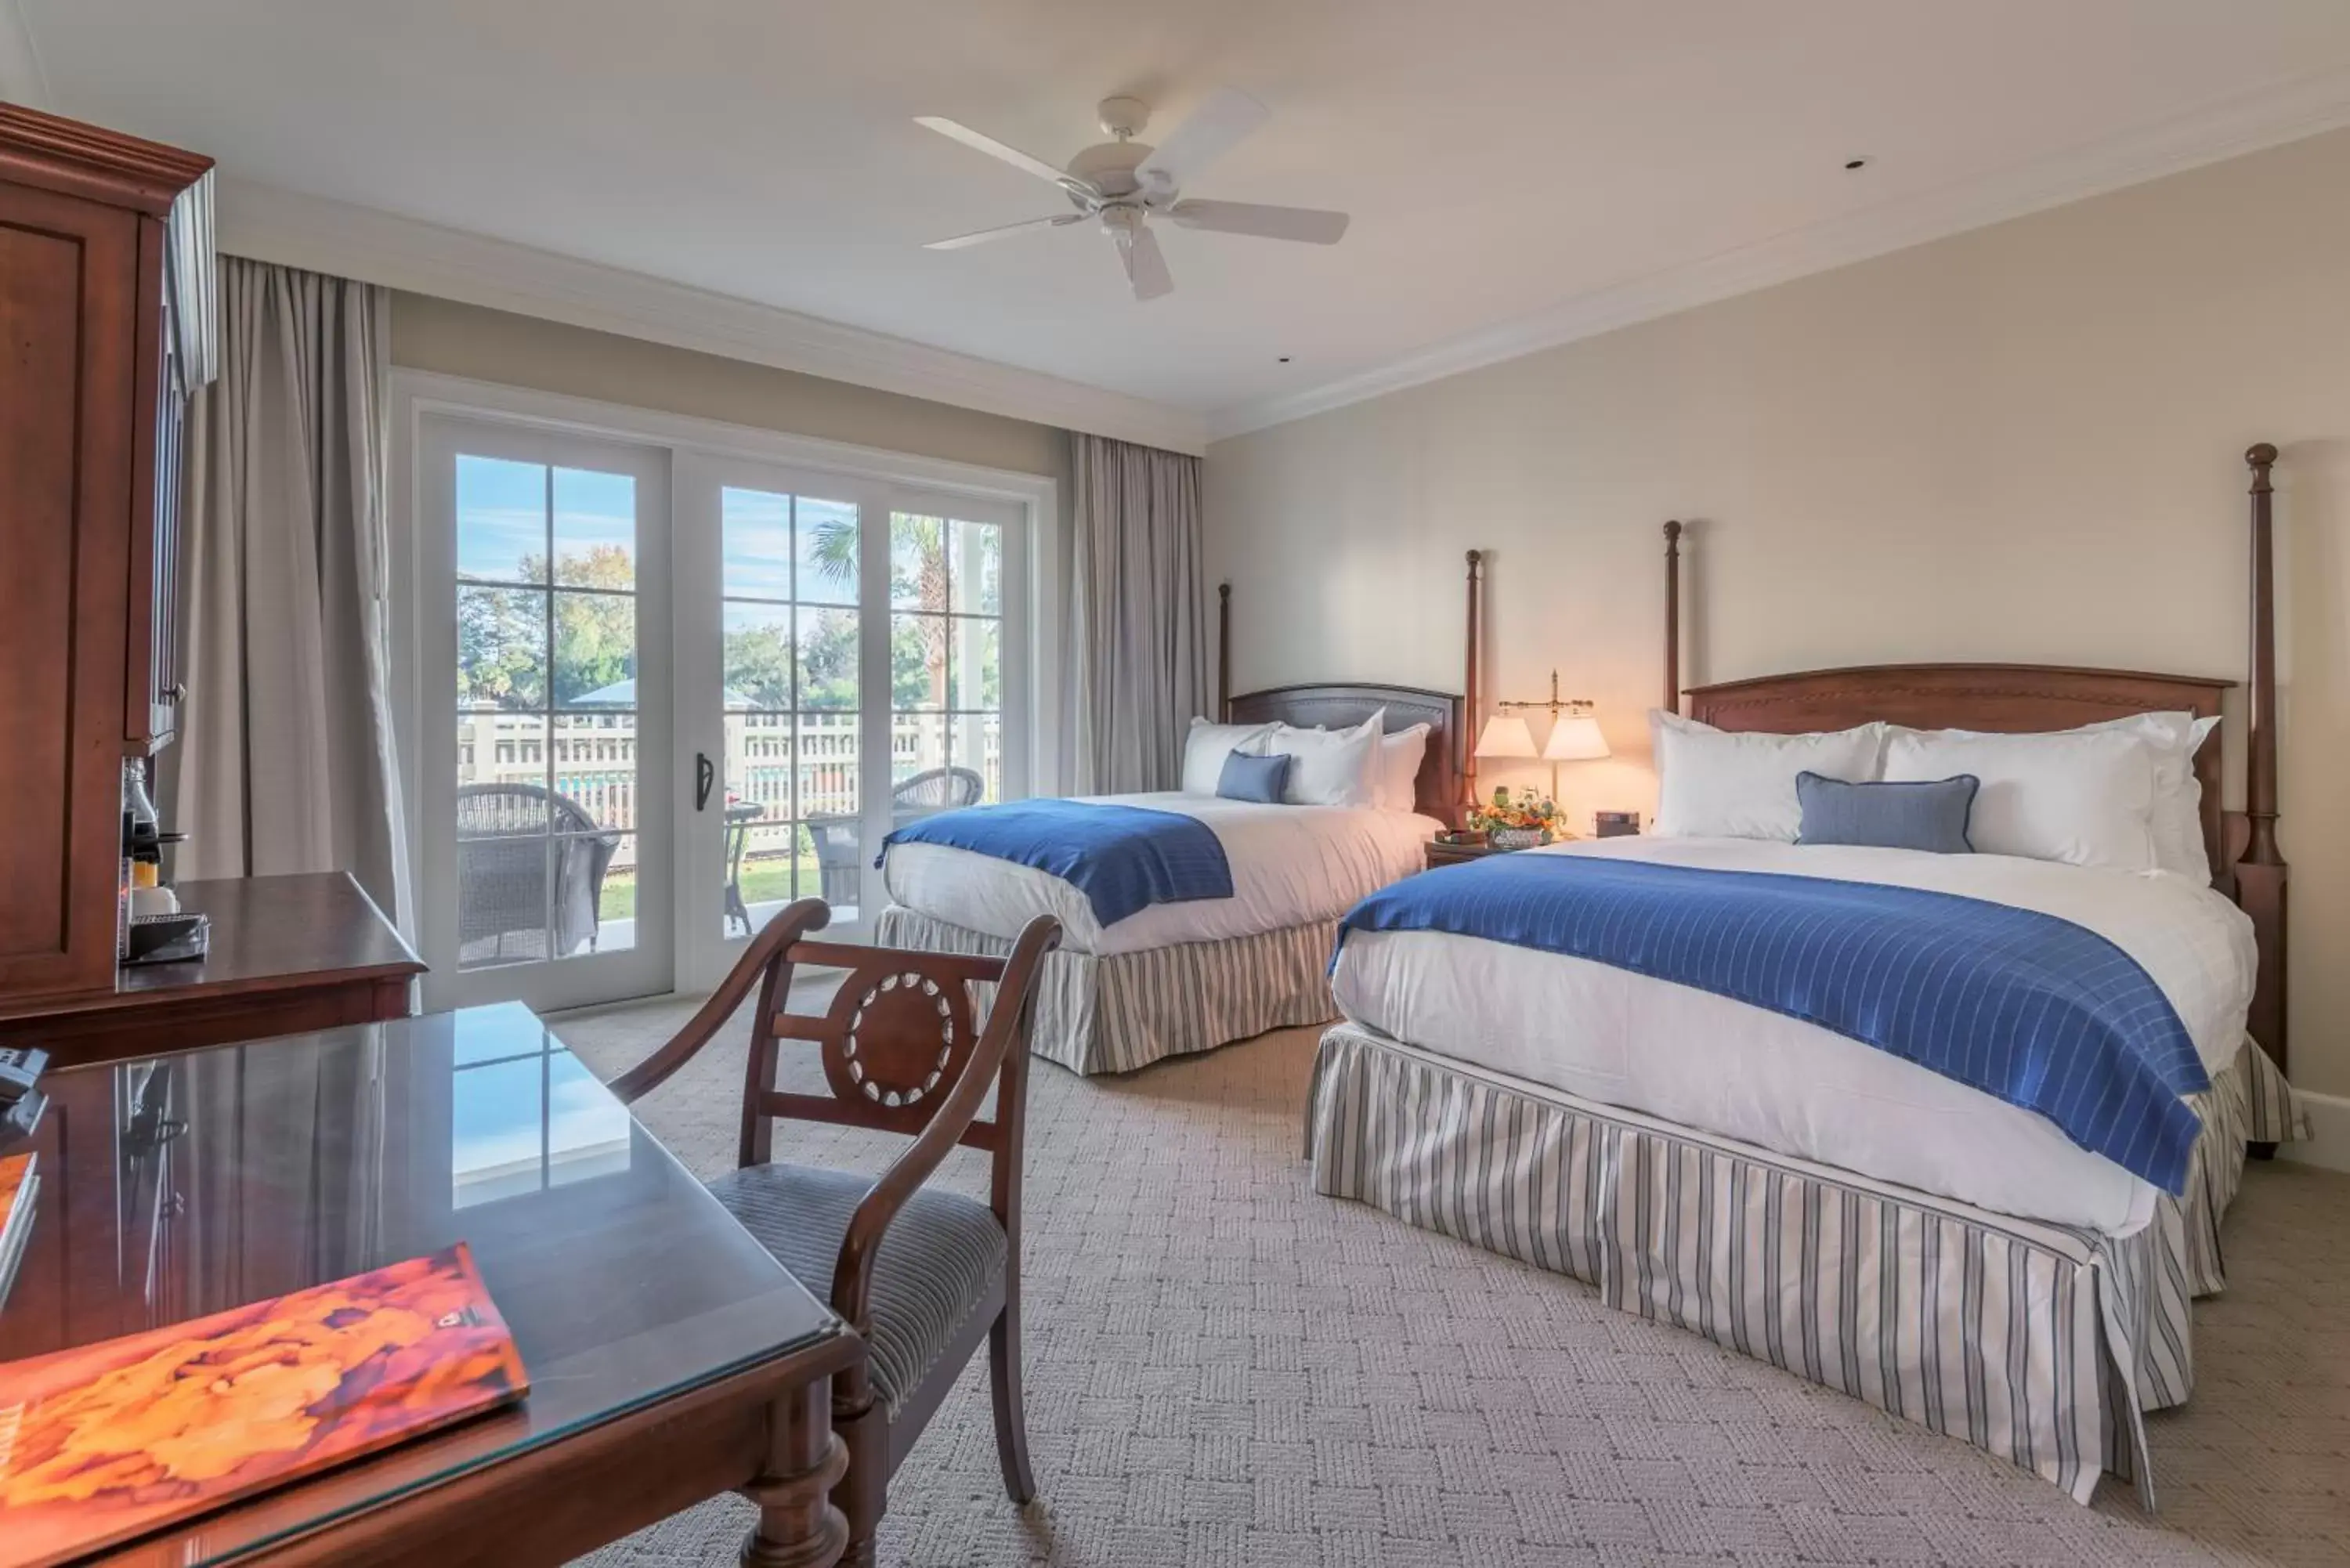 Deluxe Queen Room in Montage Palmetto Bluff